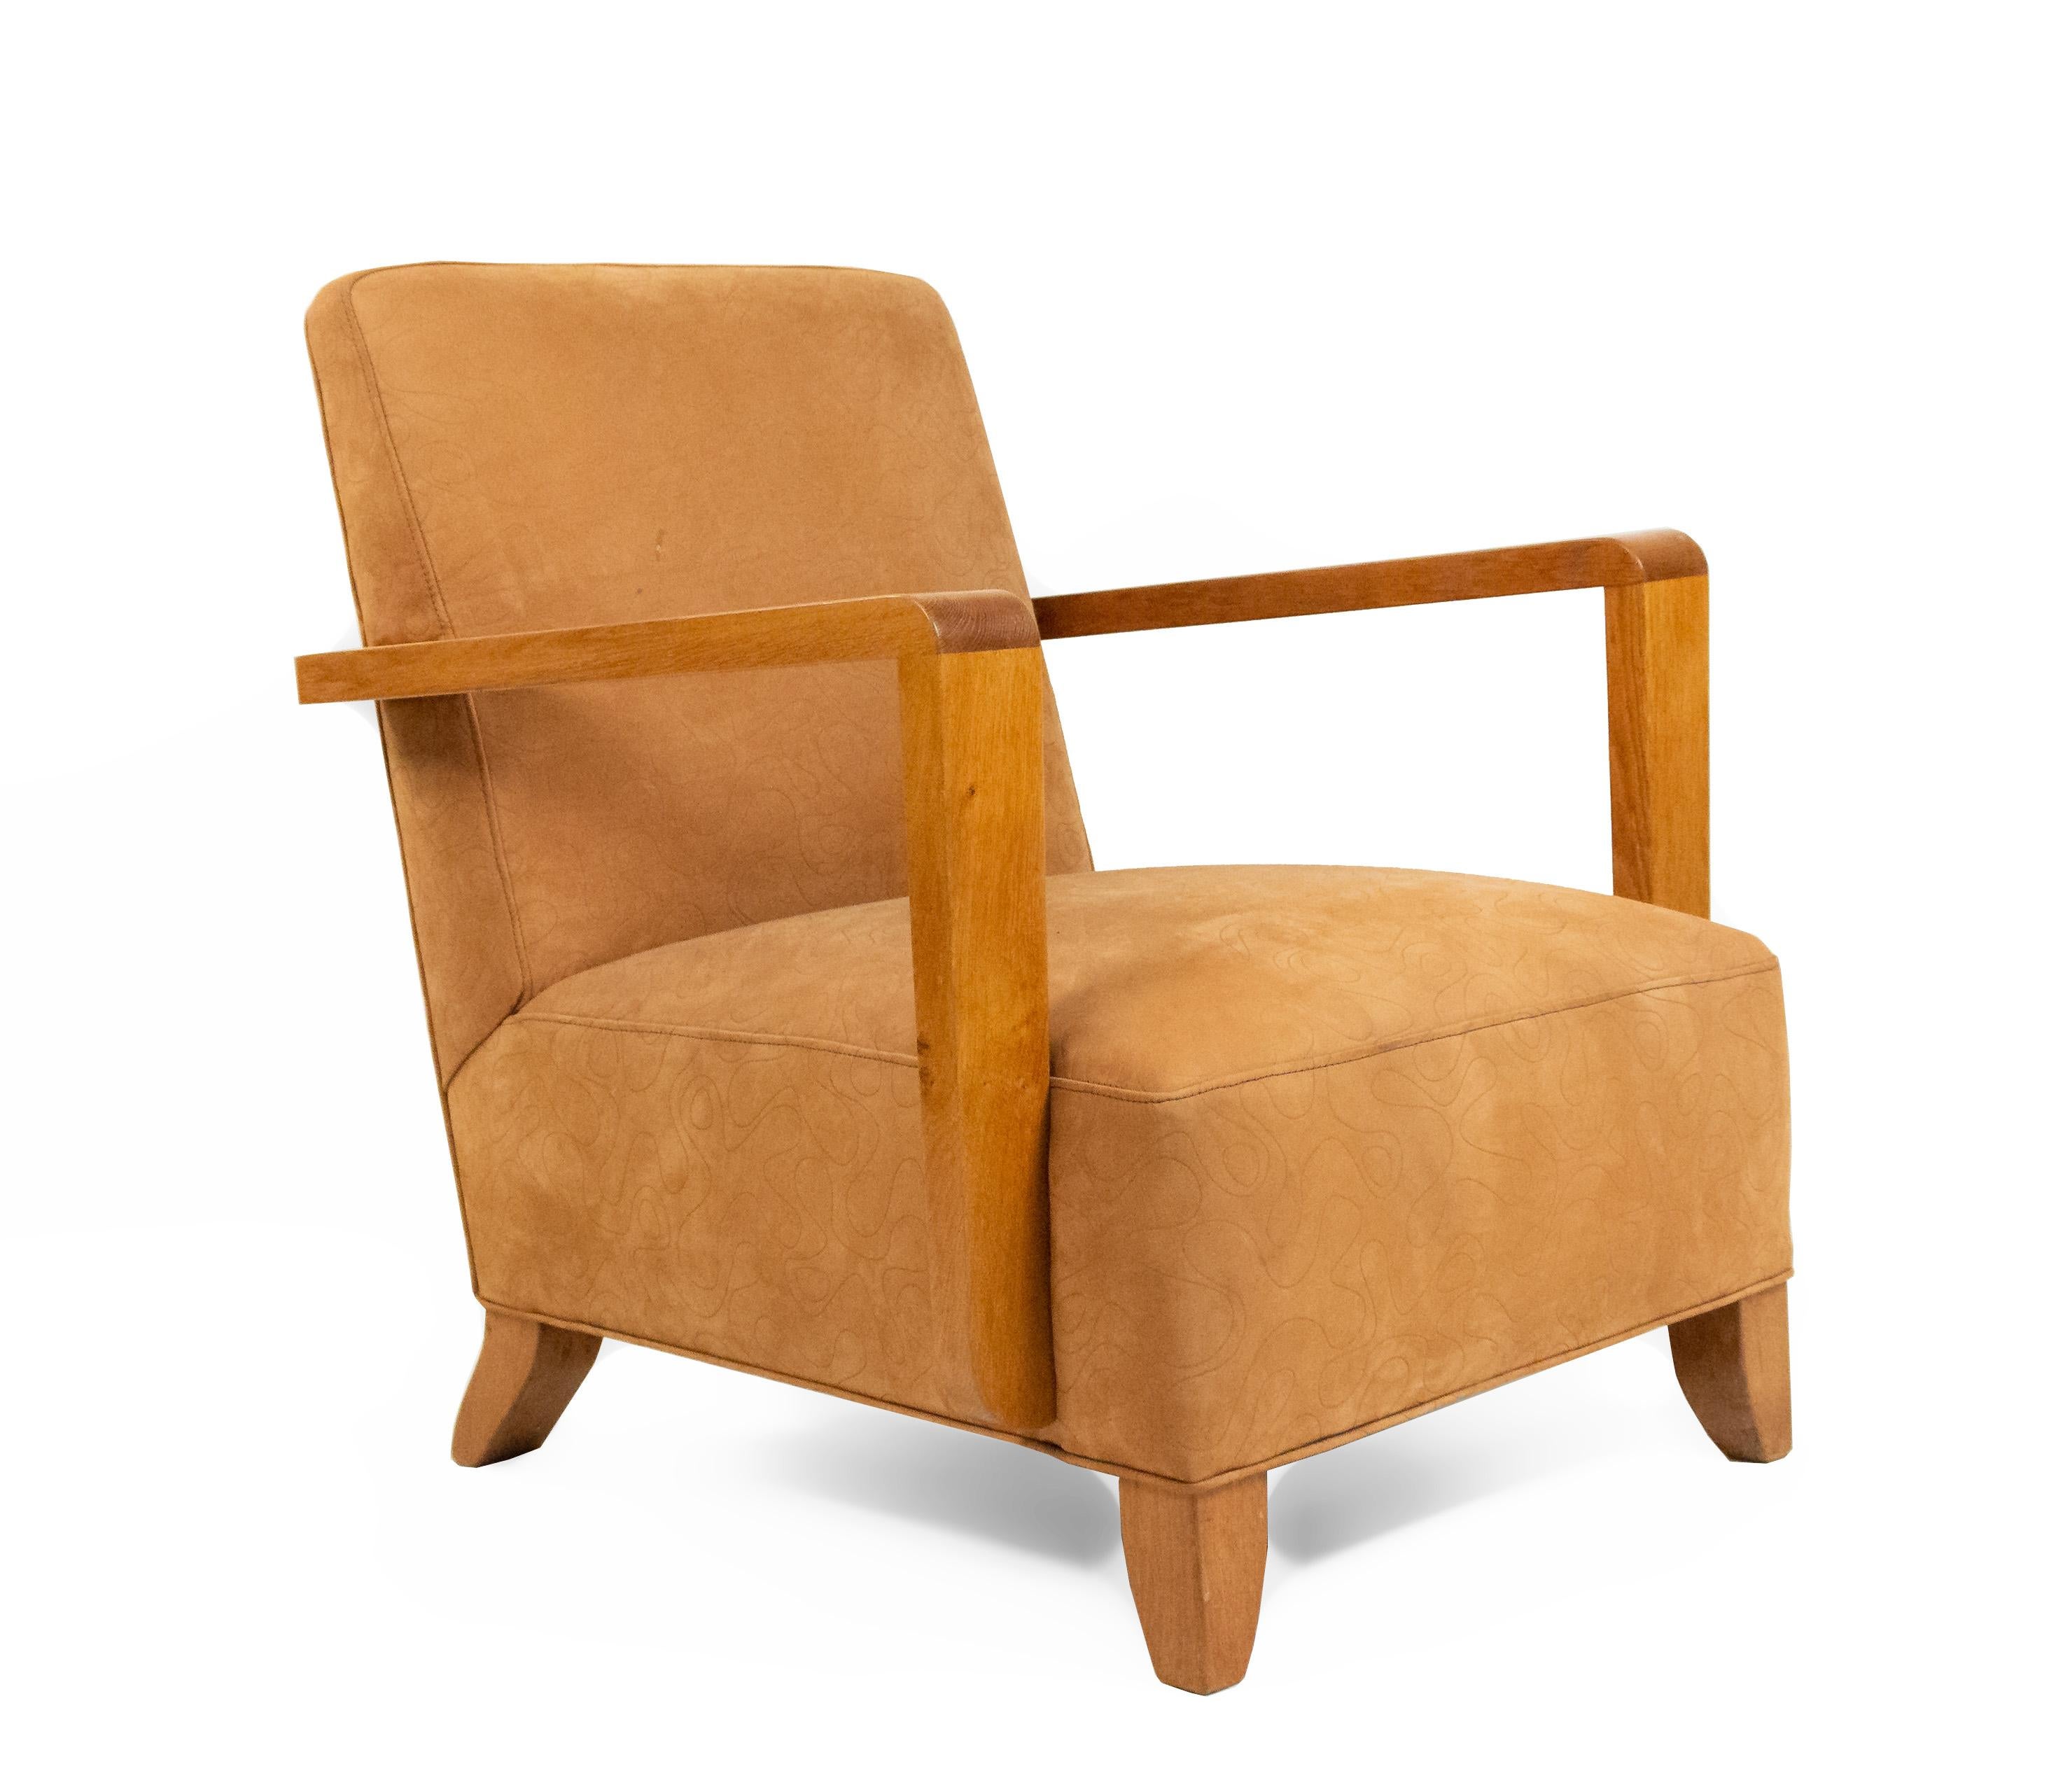 Pair of French Modernist geometric form (1940s) oak open arm chairs with a seat & back upholstered in tan suede with an impressed squiggle pattern.